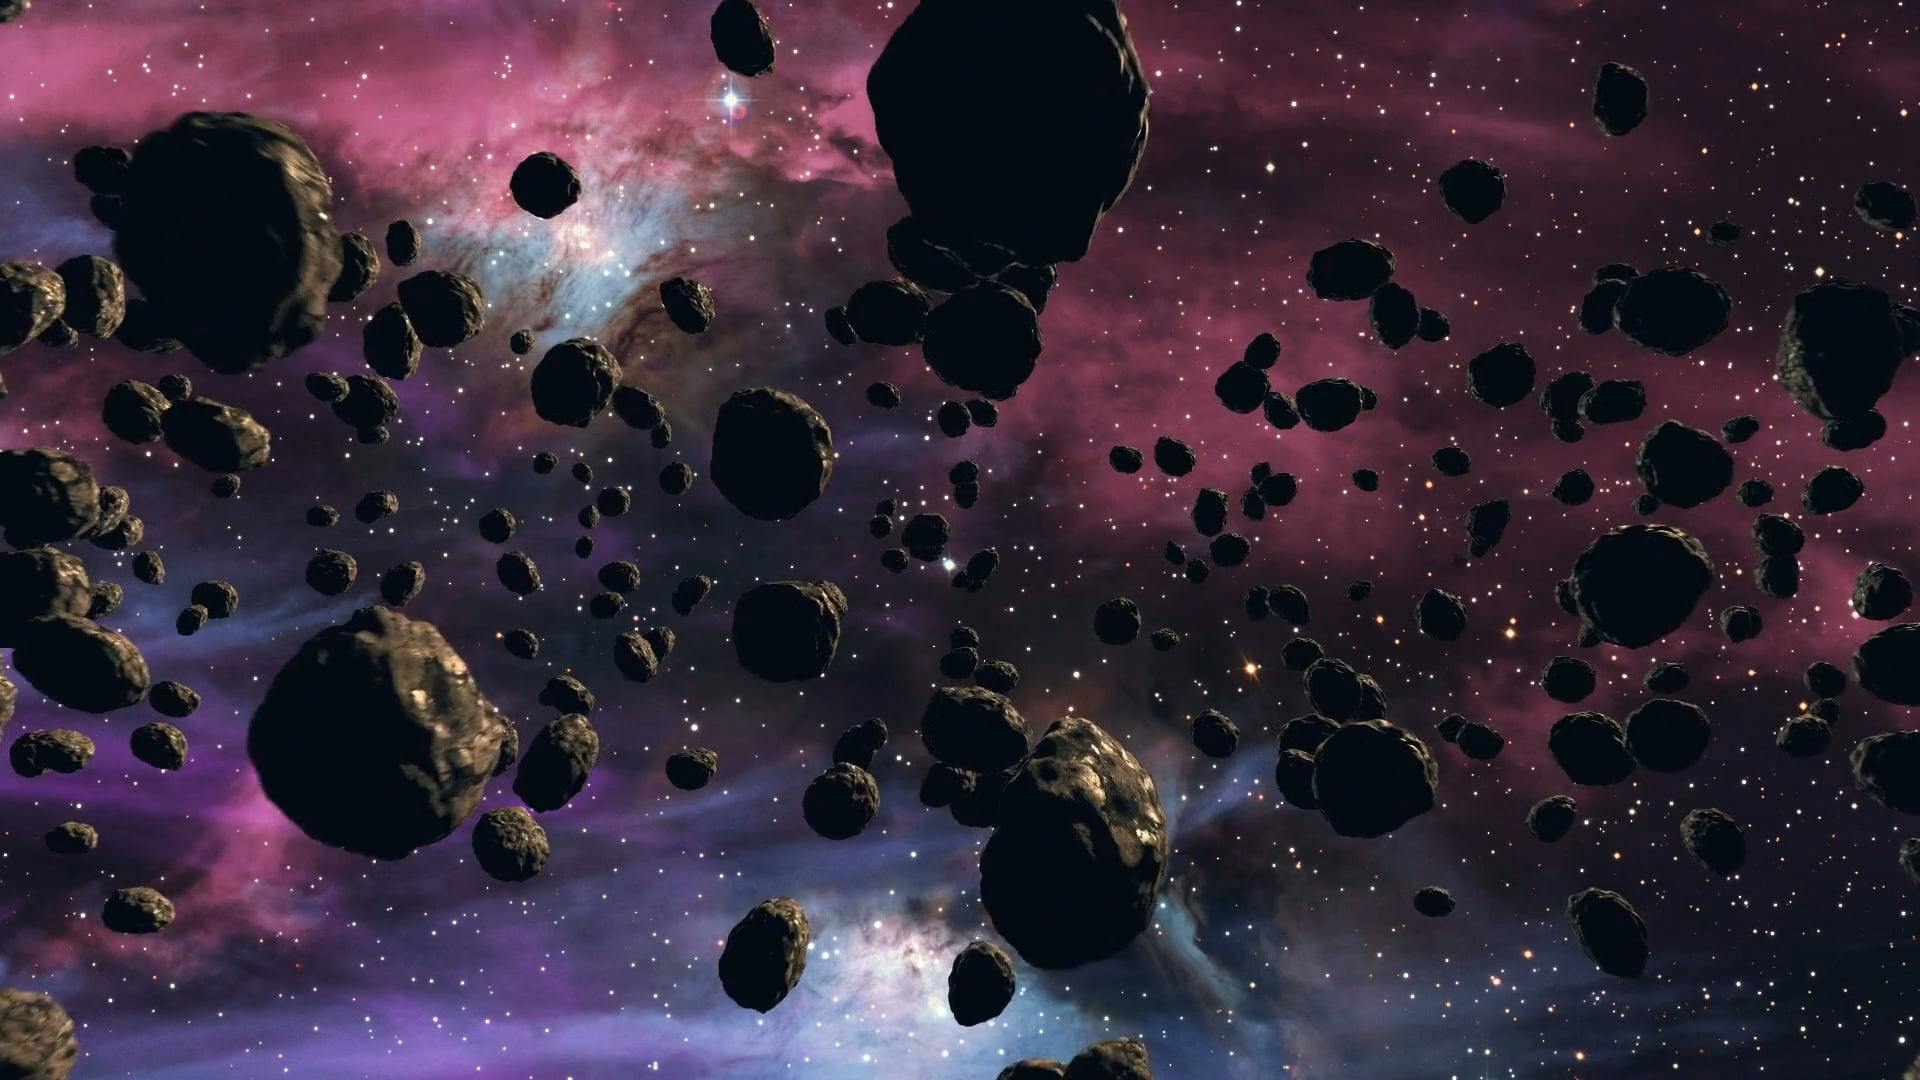 Wallpaper  black night space sky purple violet cartoon universe  astronomy constellation Adventure Time midnight point star darkness  computer wallpaper atmosphere of earth astronomical object phenomenon  4060x2395 px 4060x2395 